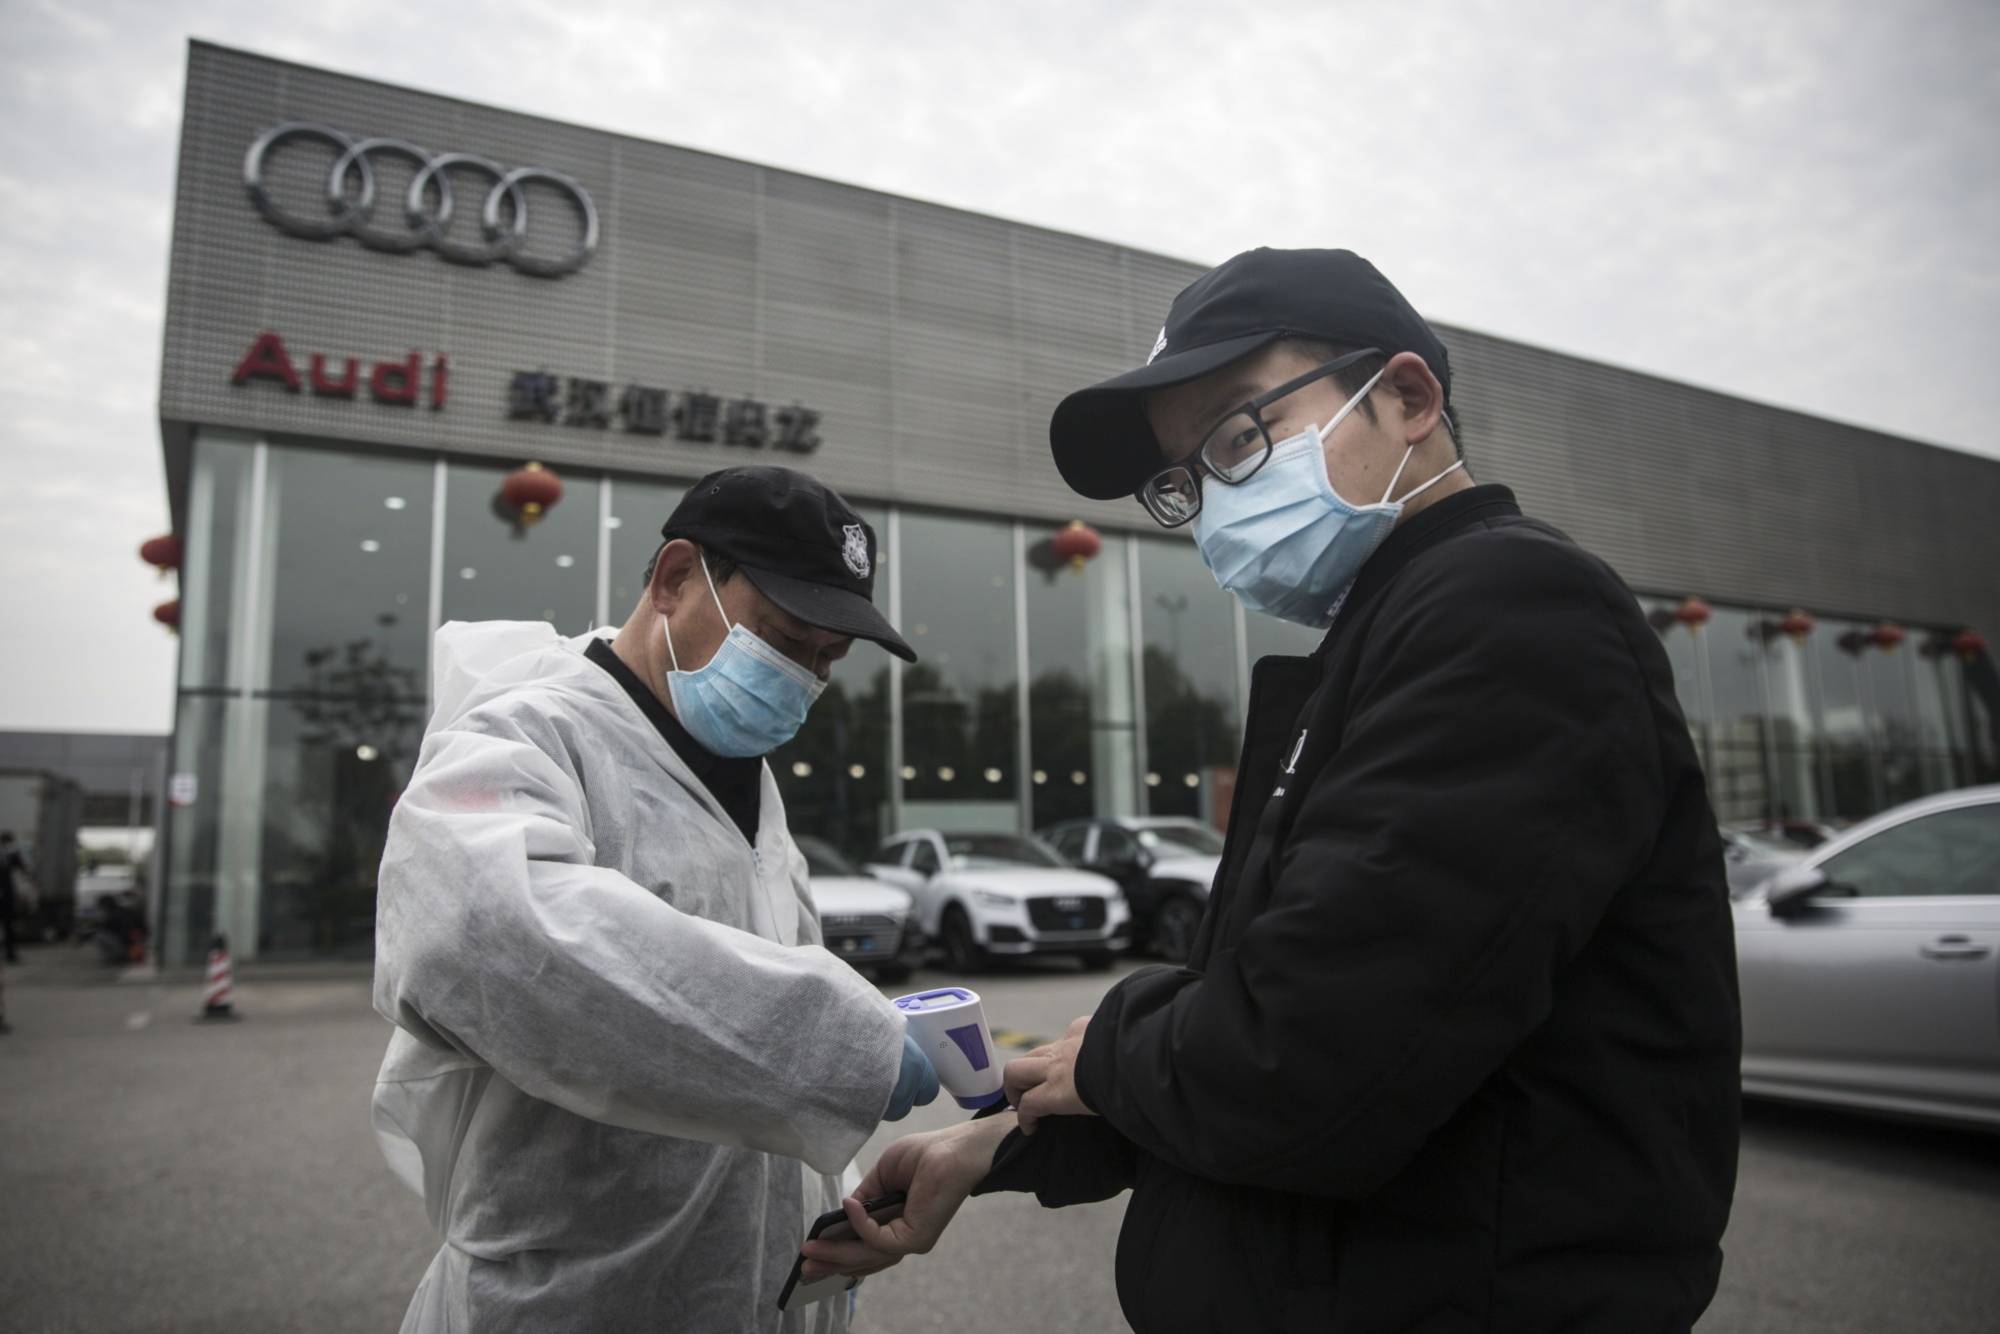 A security guard wears protective clothing as he checks the temperature of people entering the Audi store in Wuhan on Monday. | BLOOMBERG